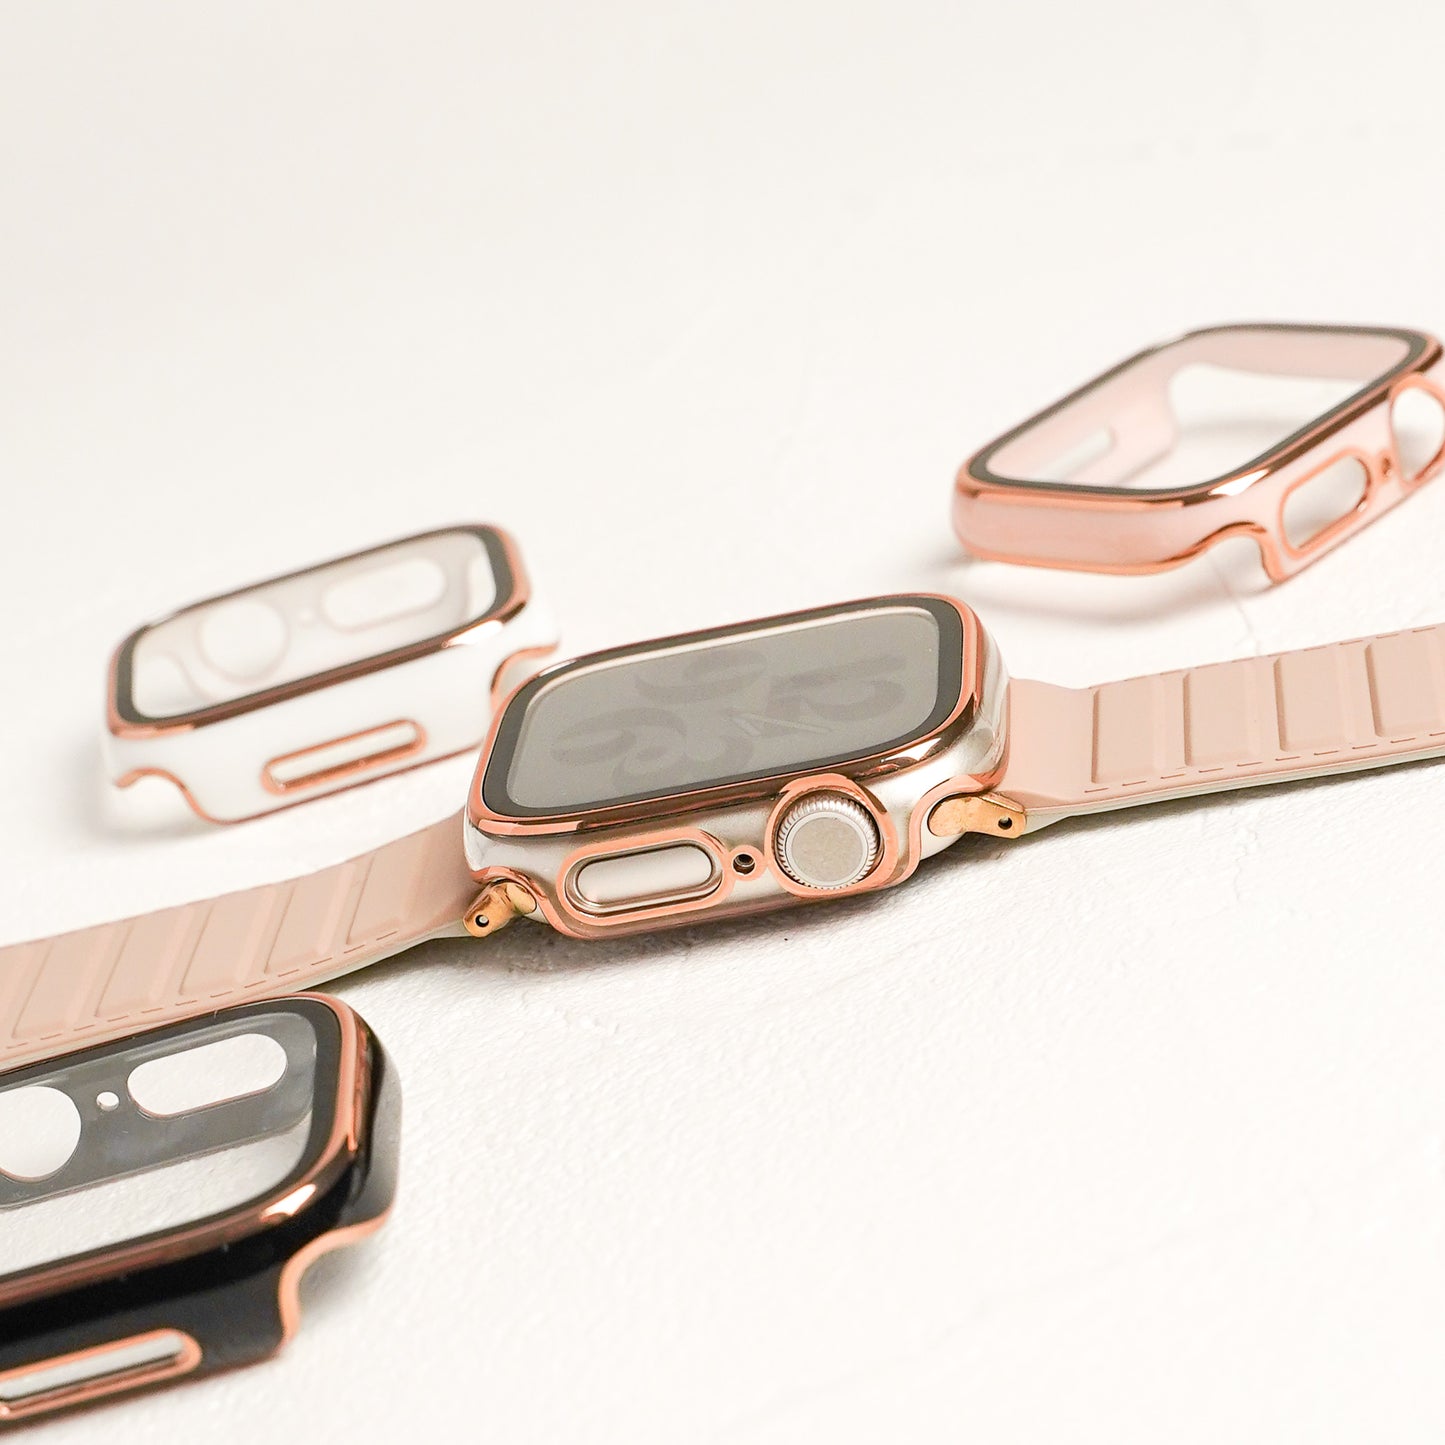 [NEW] Rose Gold Line Full Protective Cover Hard Type Apple Watch Case Apple Watch